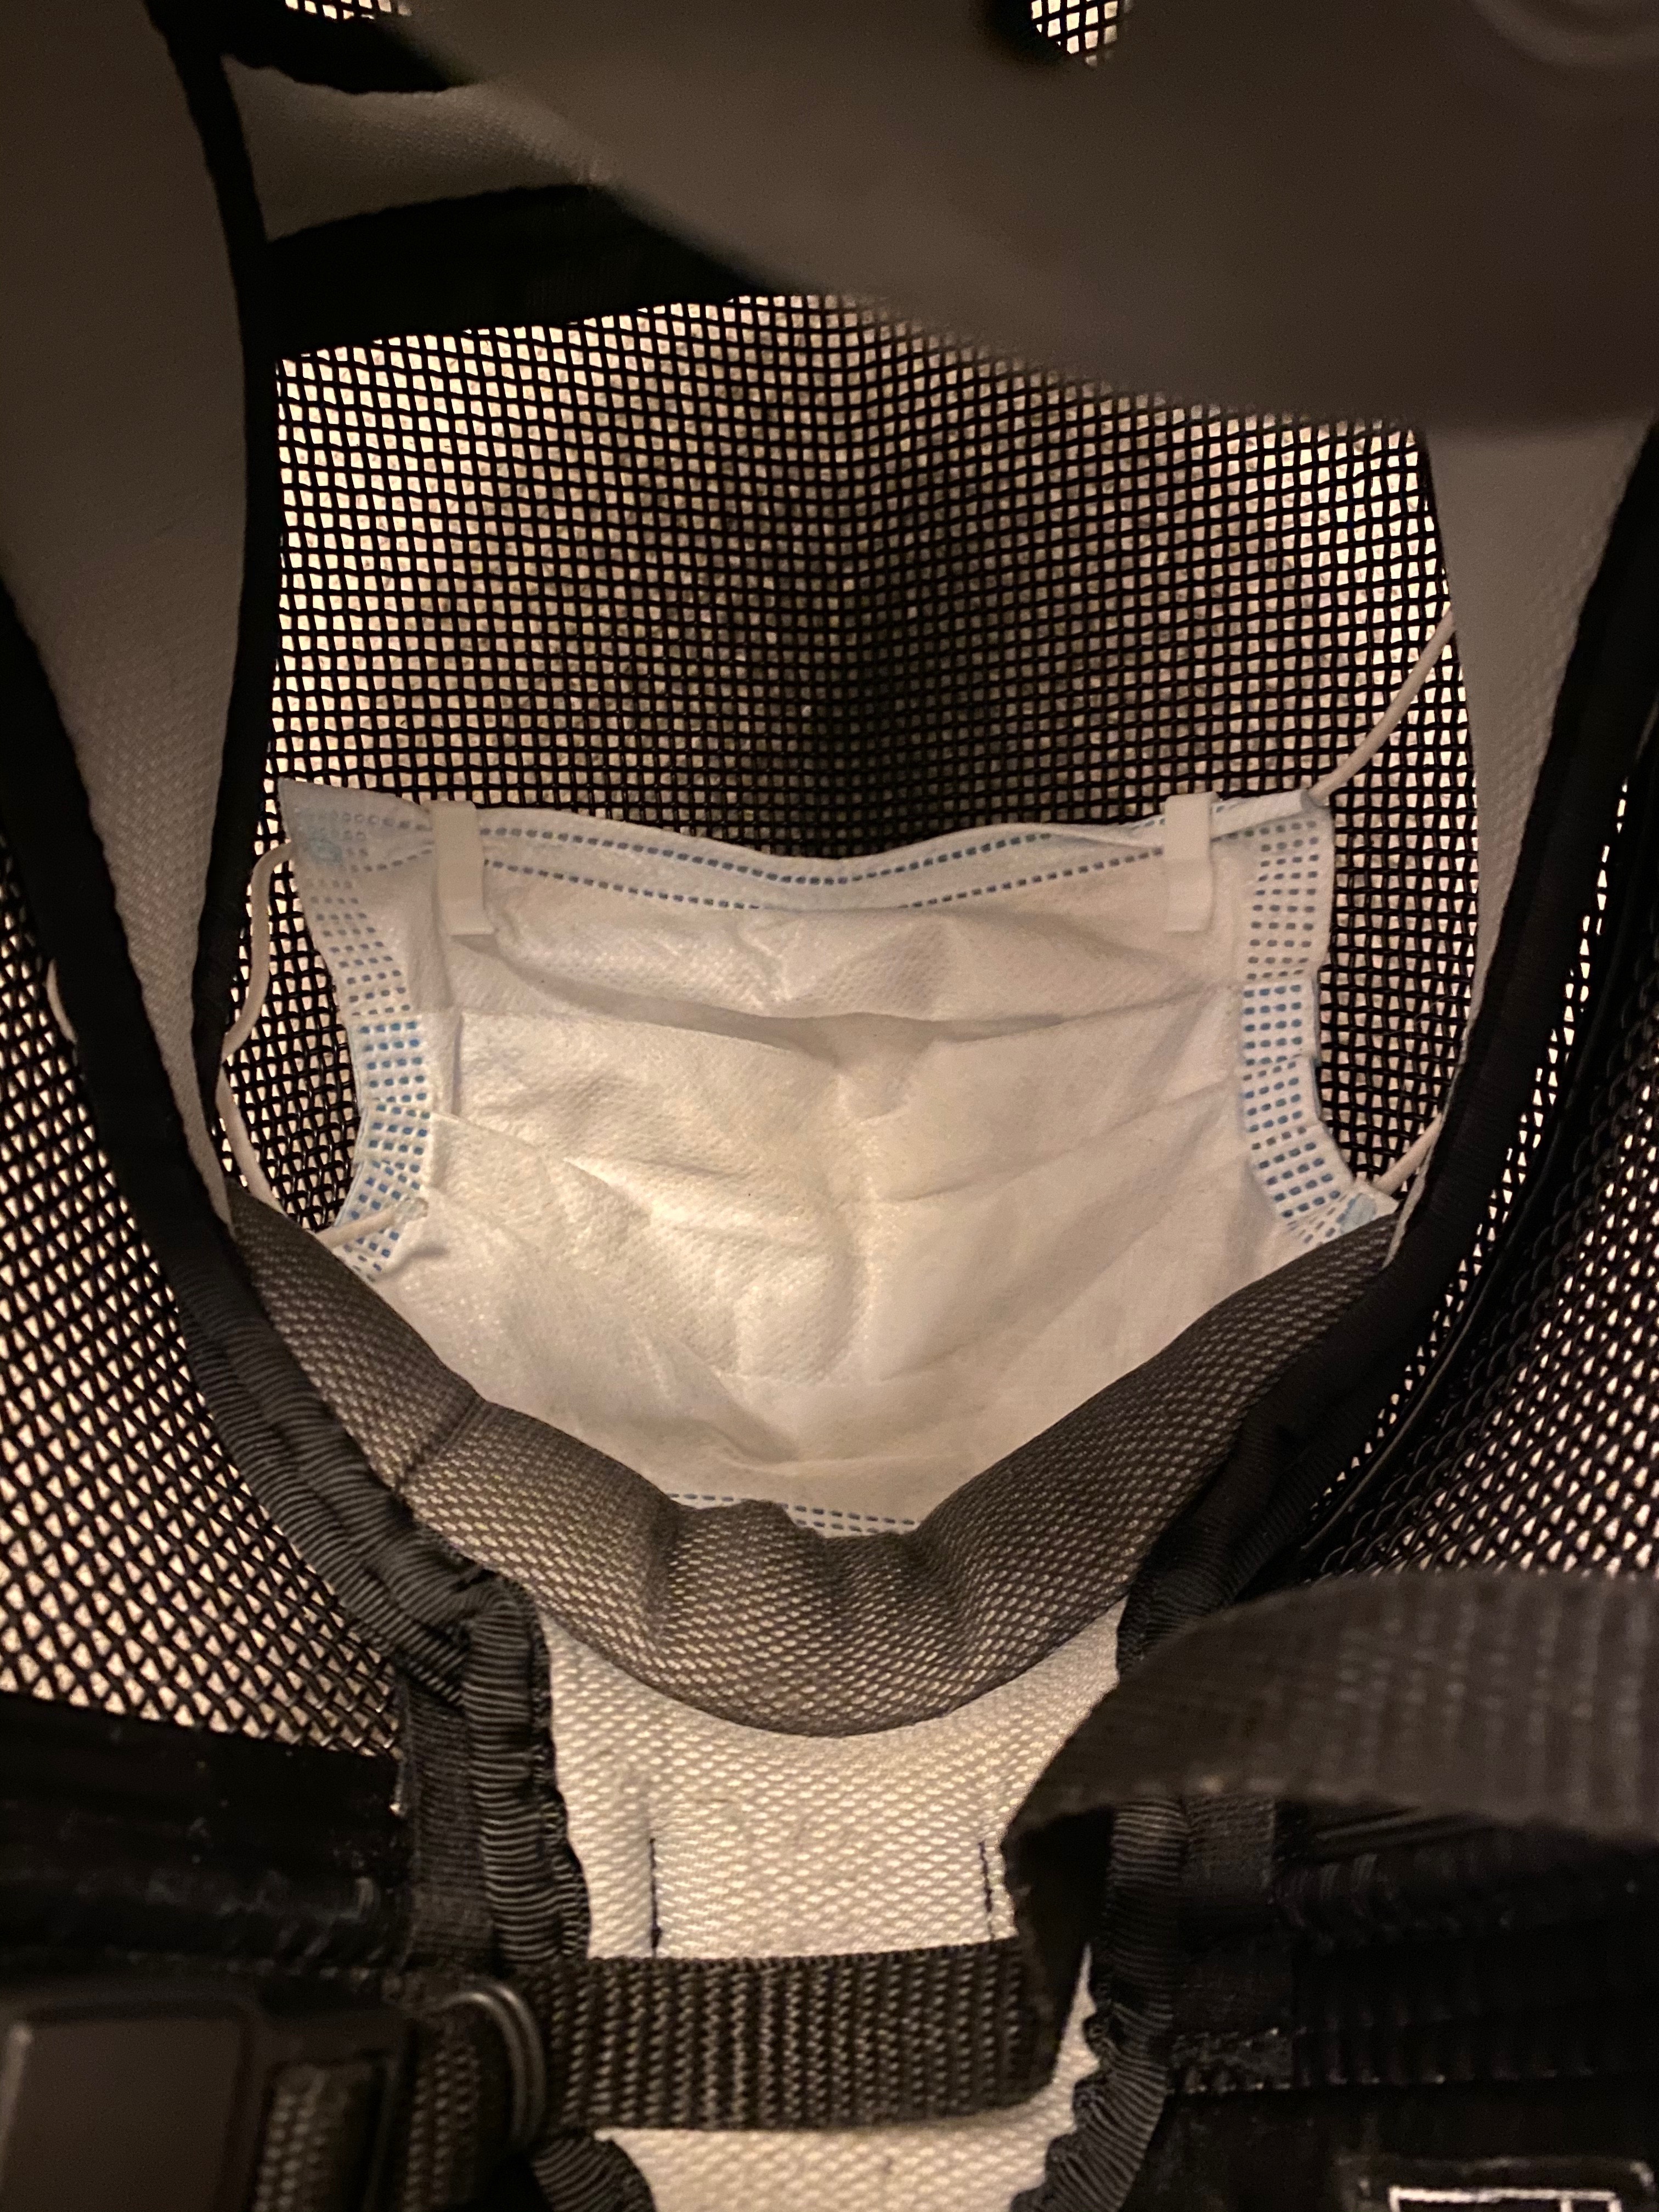 Clips fitted into a fencing mask with a face mask held in place